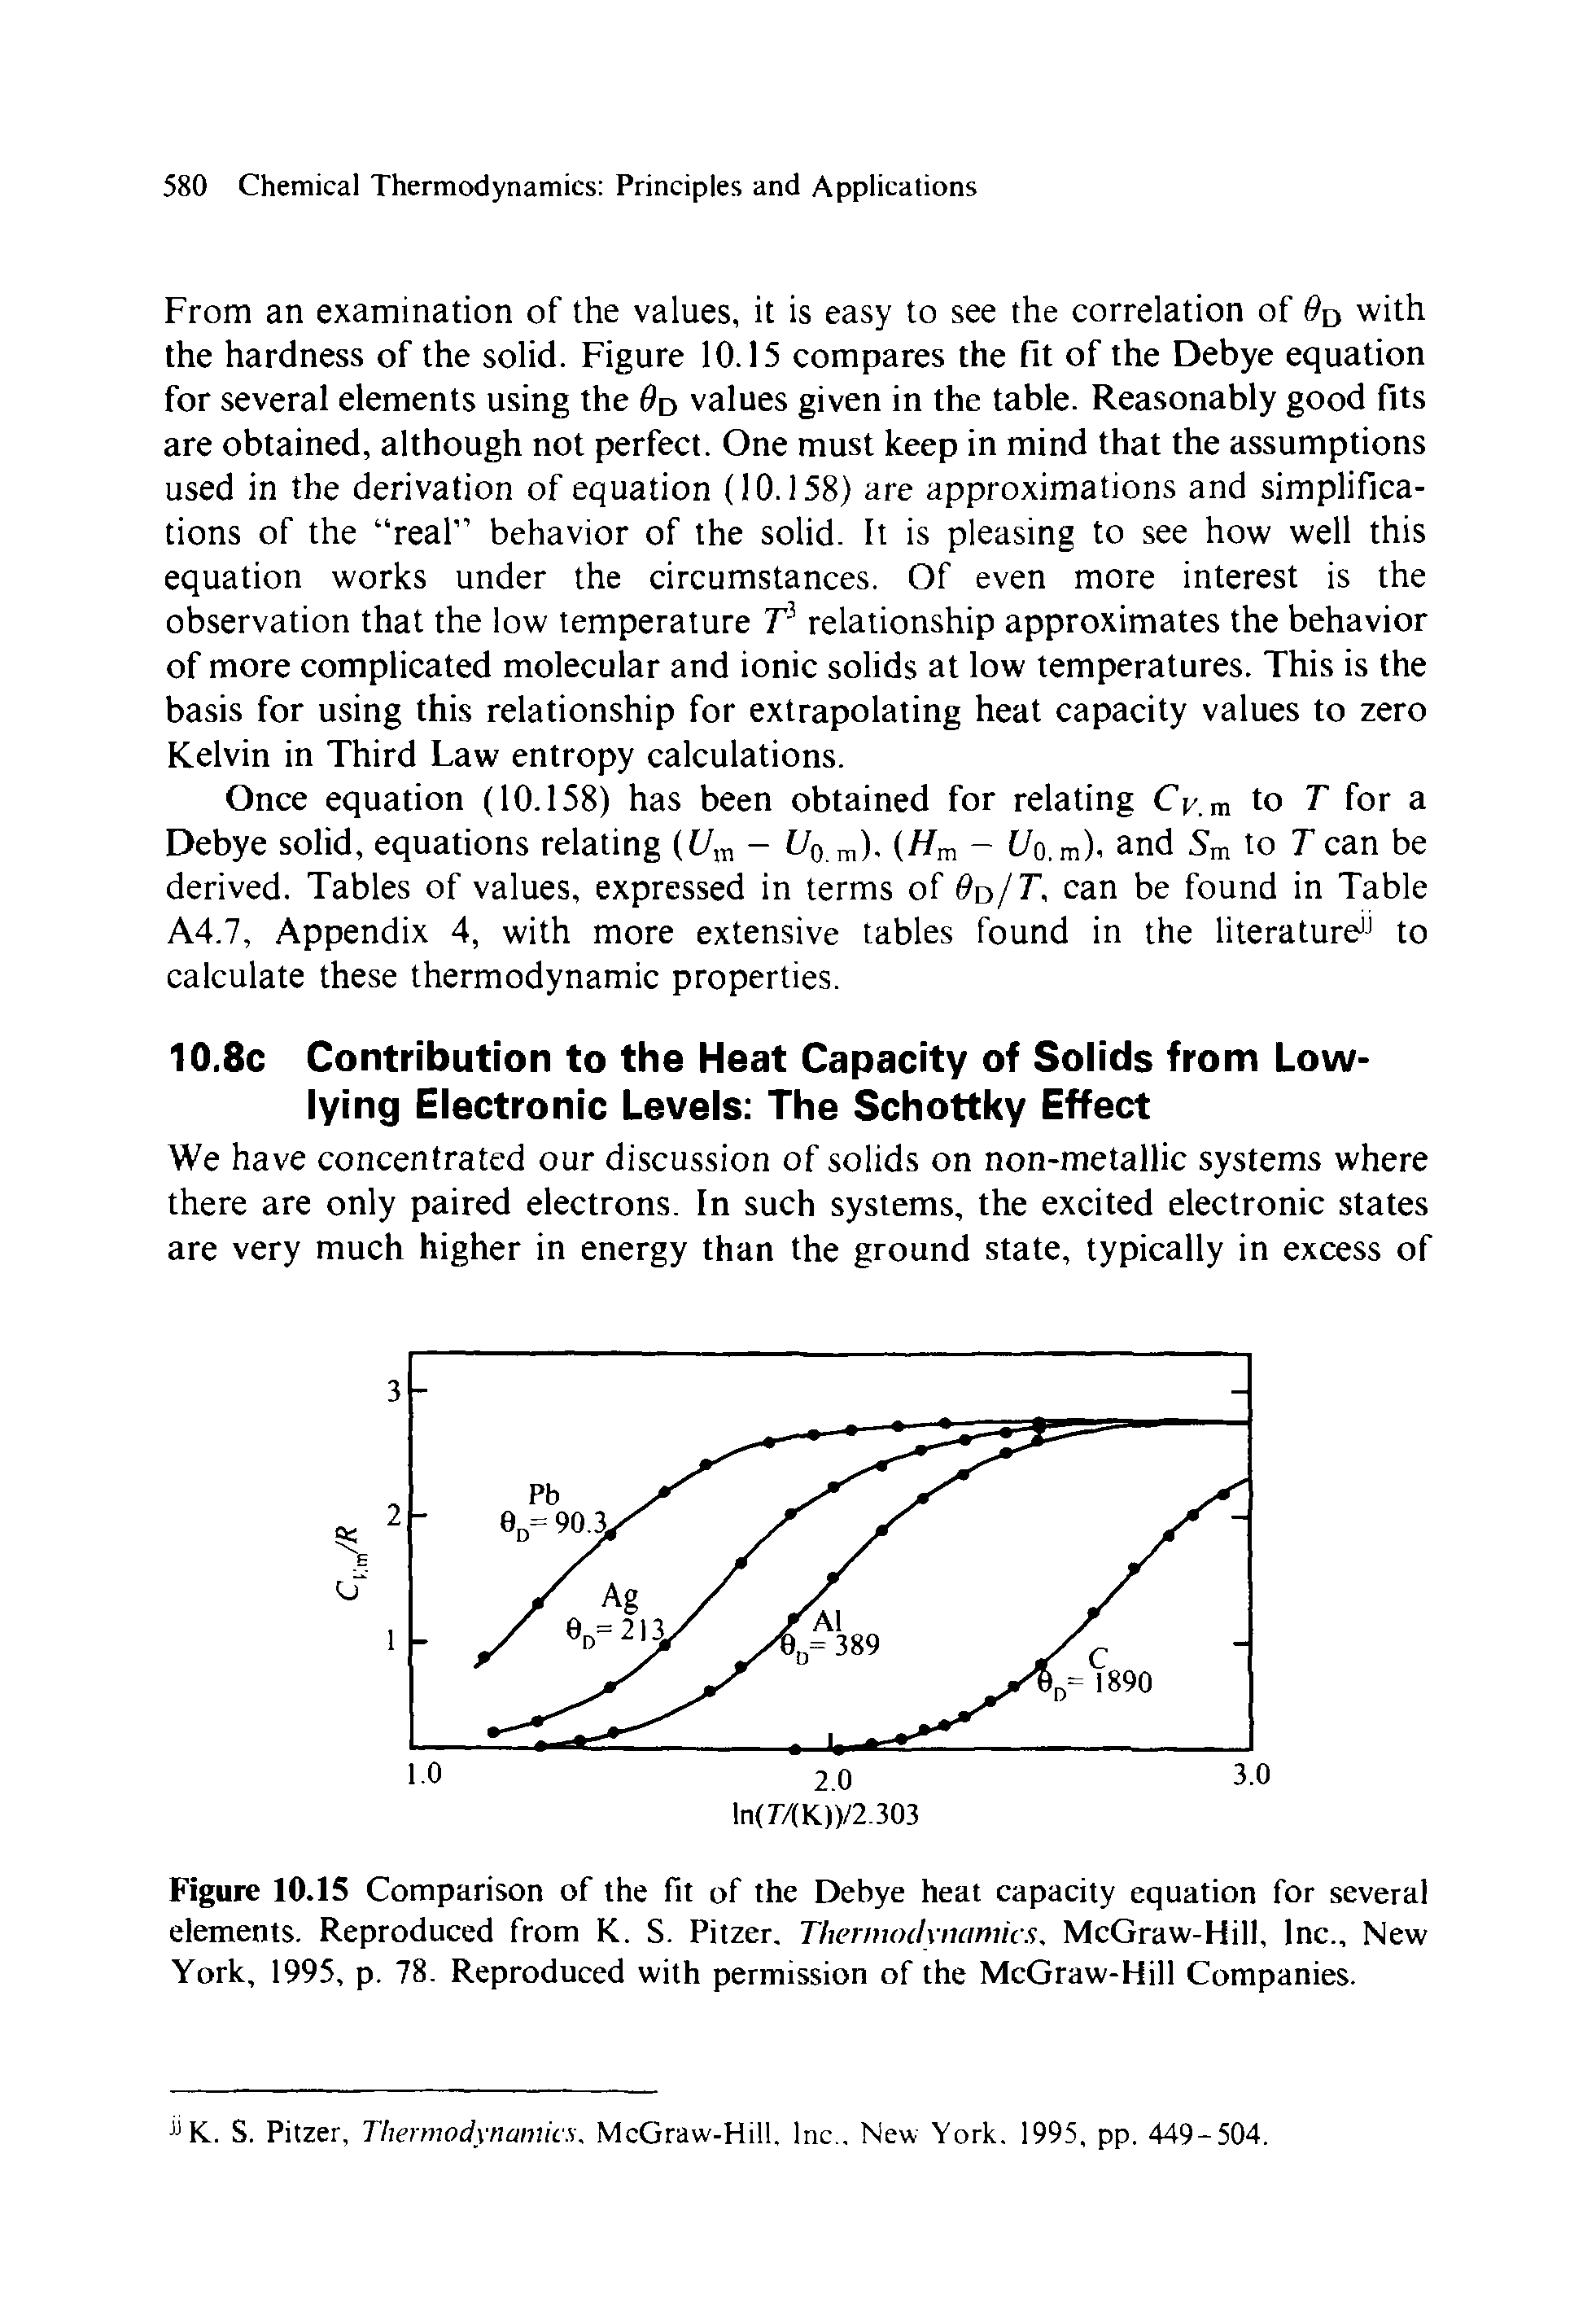 Figure 10.15 Comparison of the fit of the Debye heat capacity equation for several elements. Reproduced from K. S. Pitzer. Thermodynamics. McGraw-Hill, Inc., New York, 1995, p. 78. Reproduced with permission of the McGraw-Hill Companies.